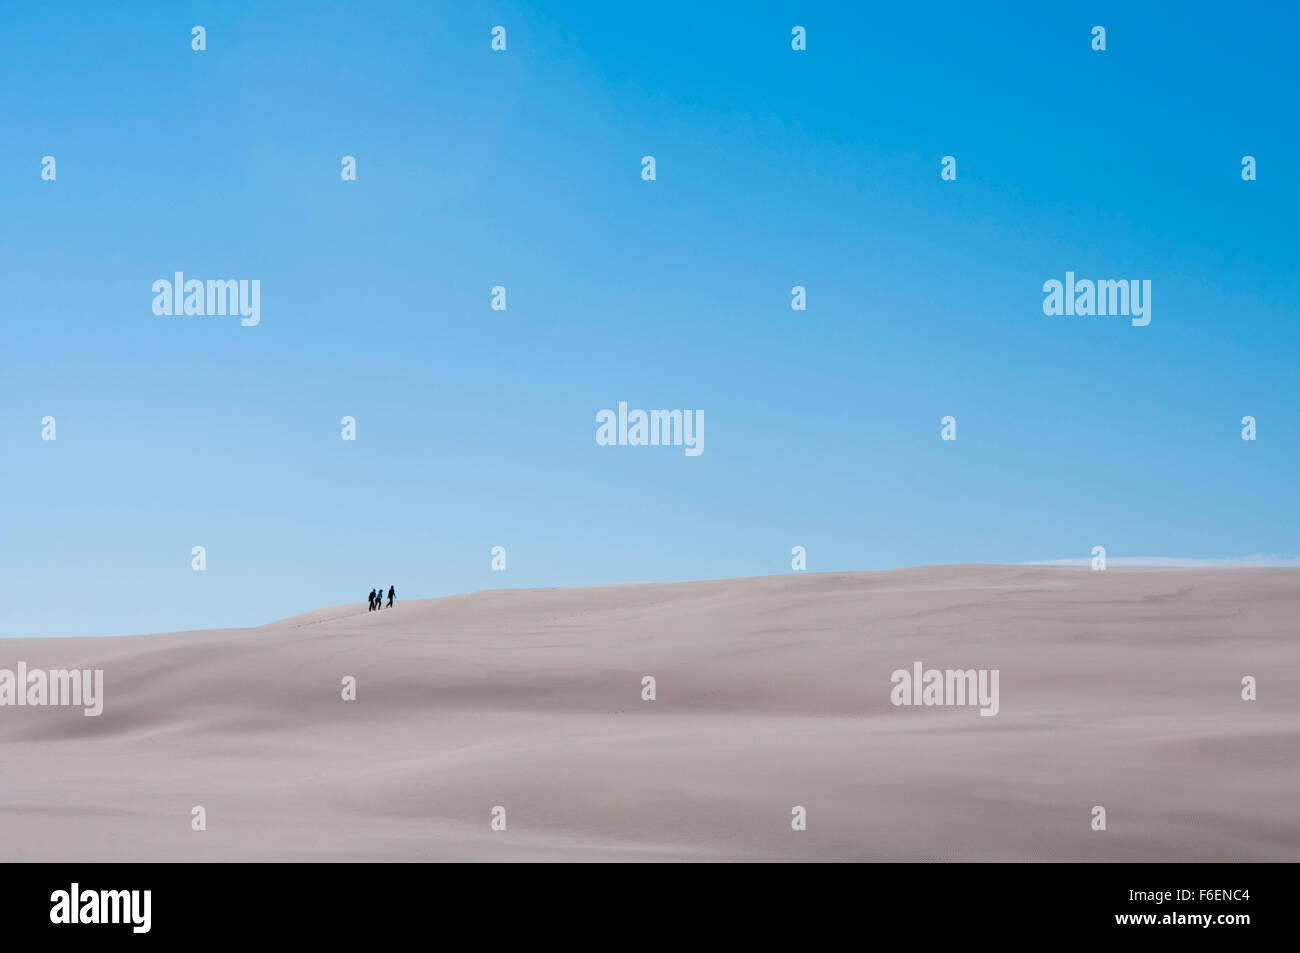 People in distance climbing white sand dune with clear sky on sunny day Stock Photo